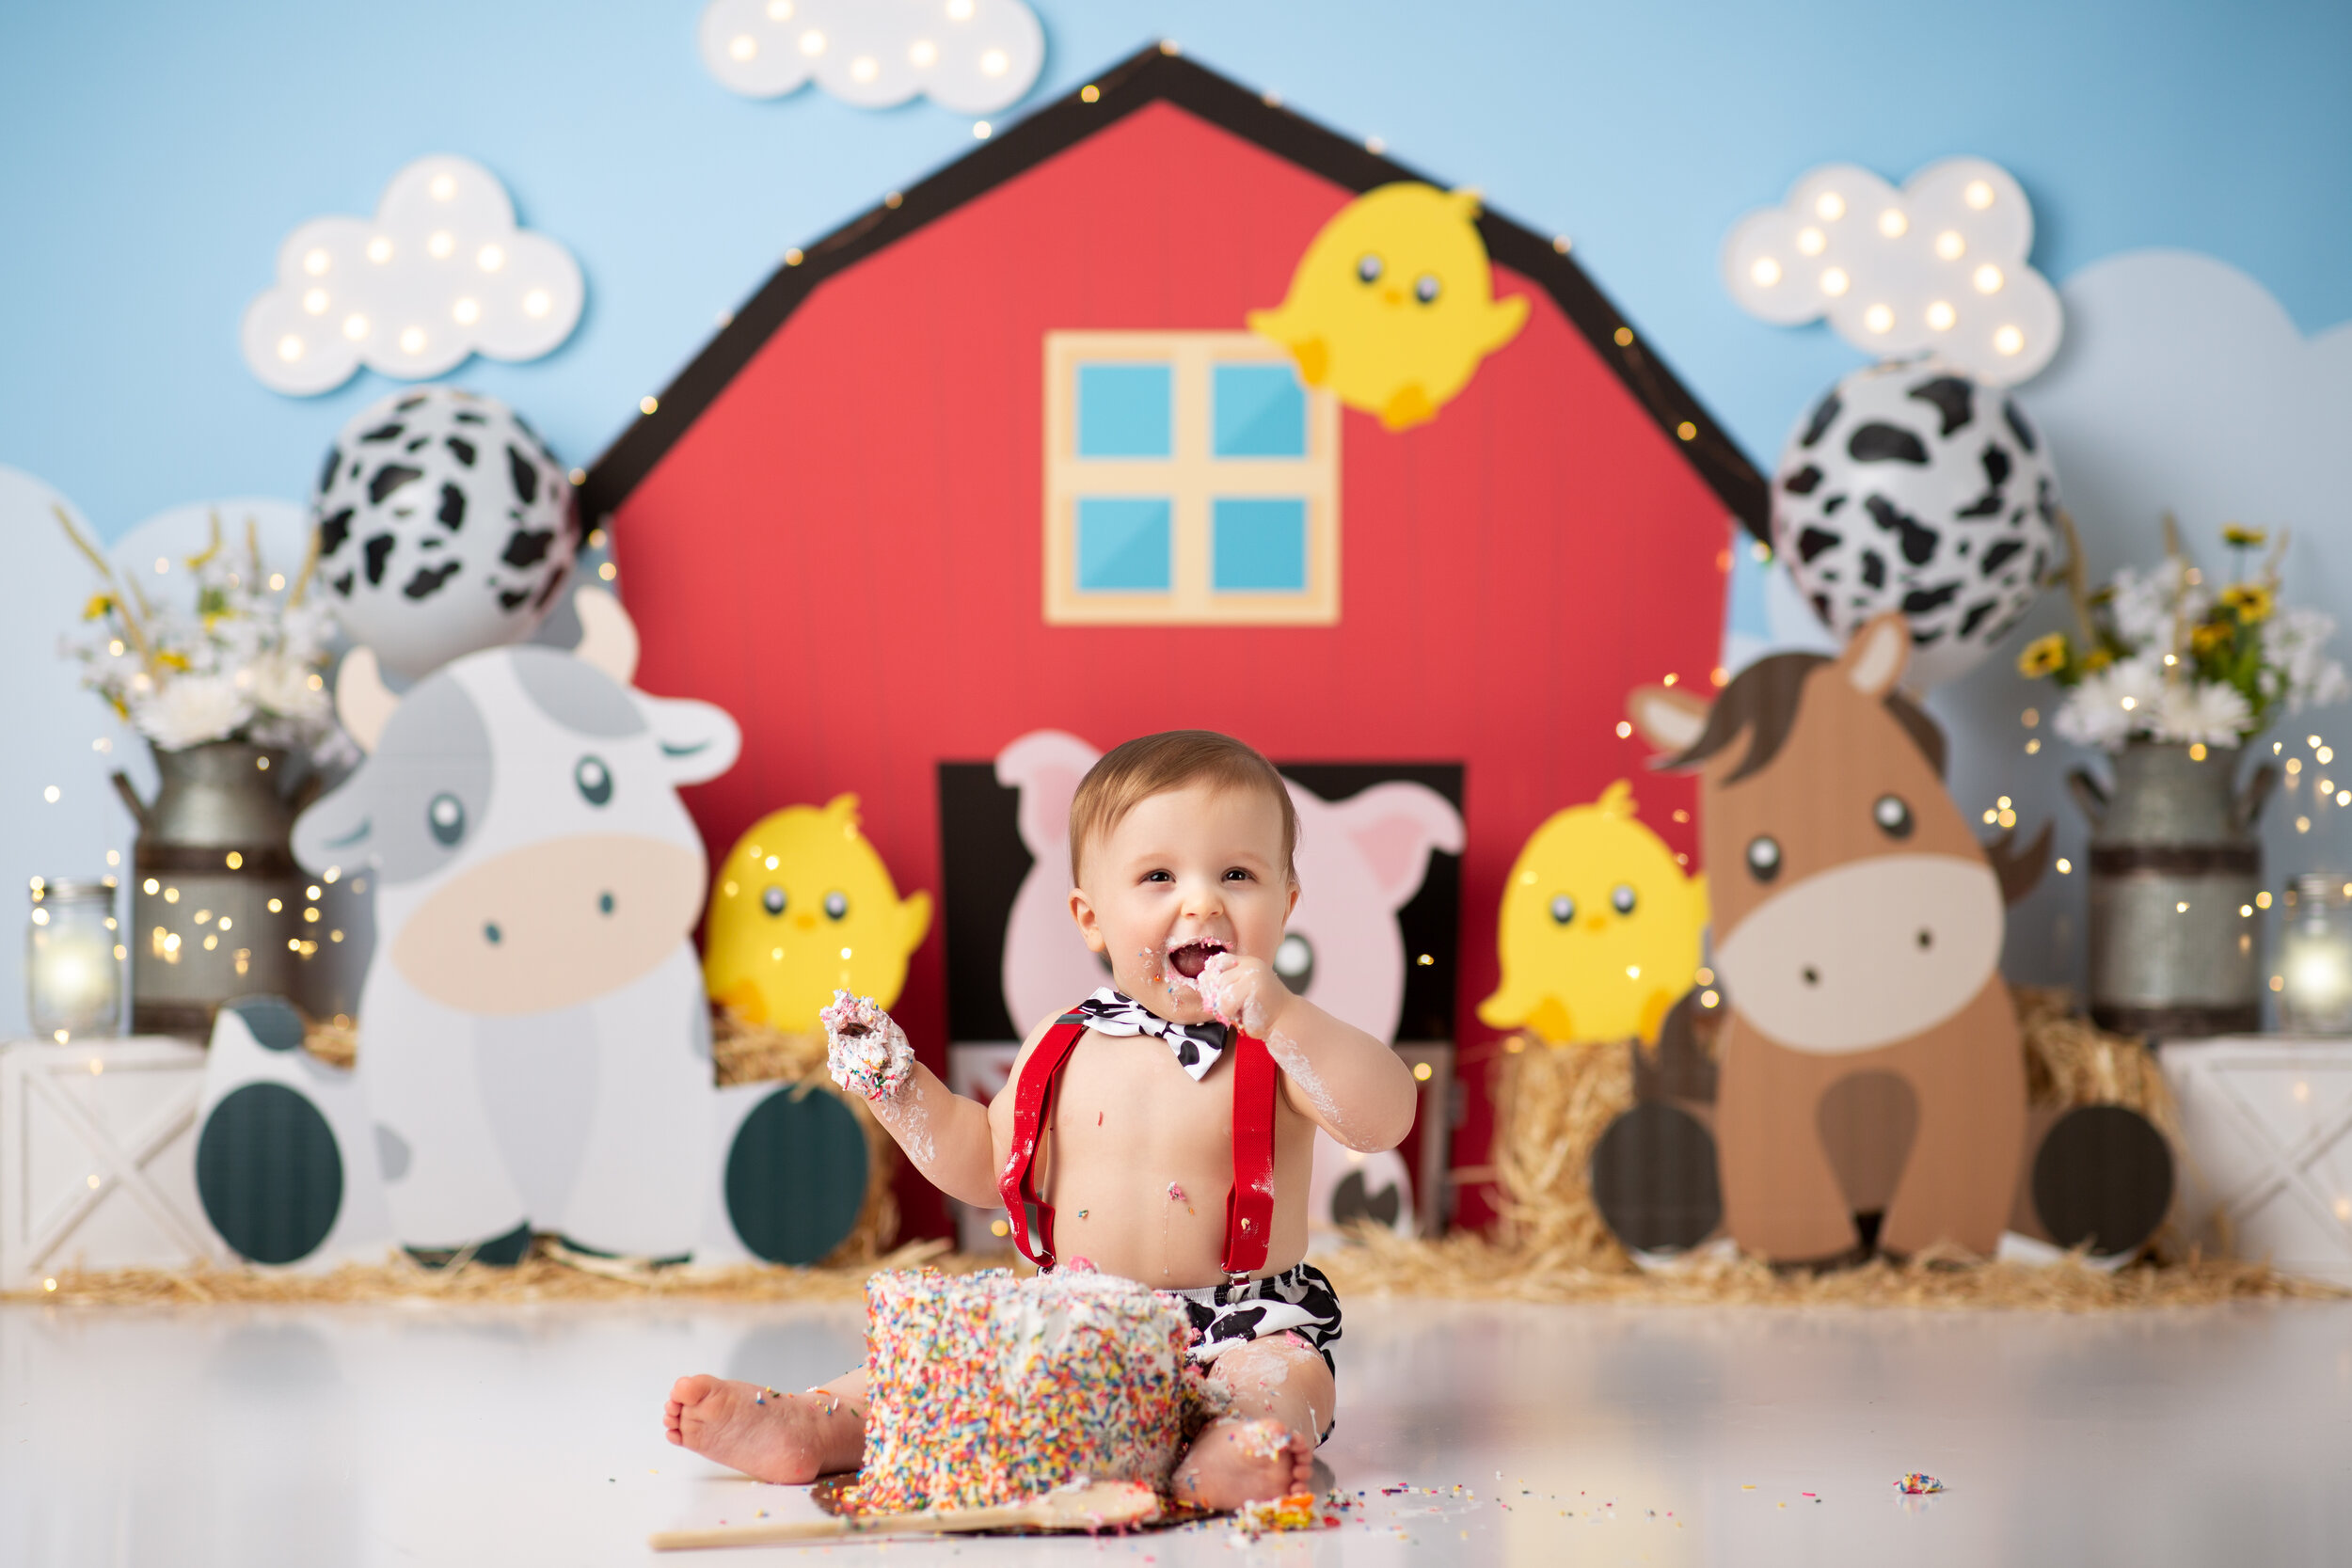  Young boy in overalls eating his first birthday cake against a backdrop of a red barn and happy farm animals 